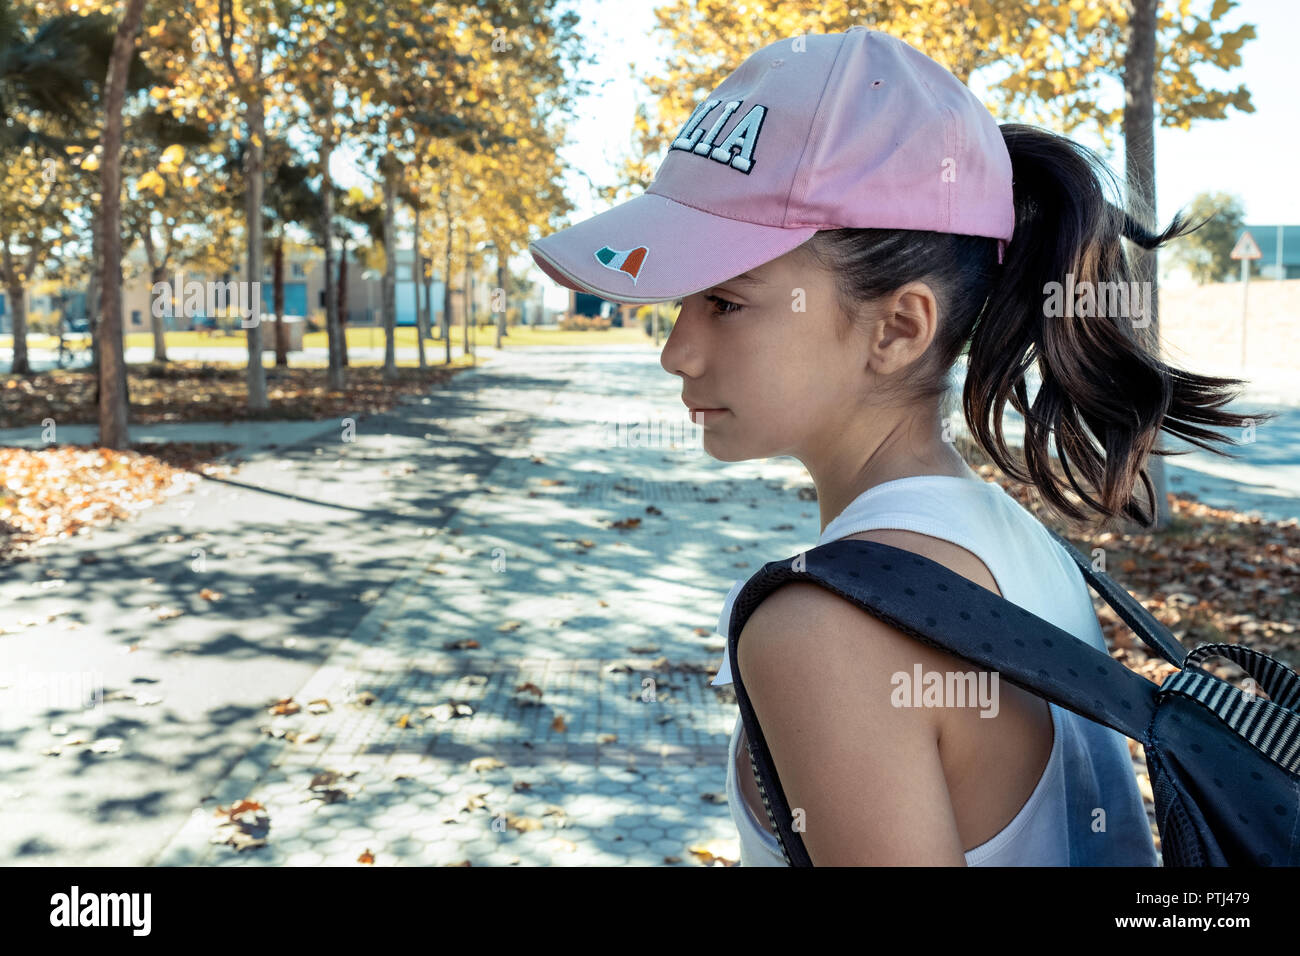 little girl with pink cap and backpack in the park Stock Photo